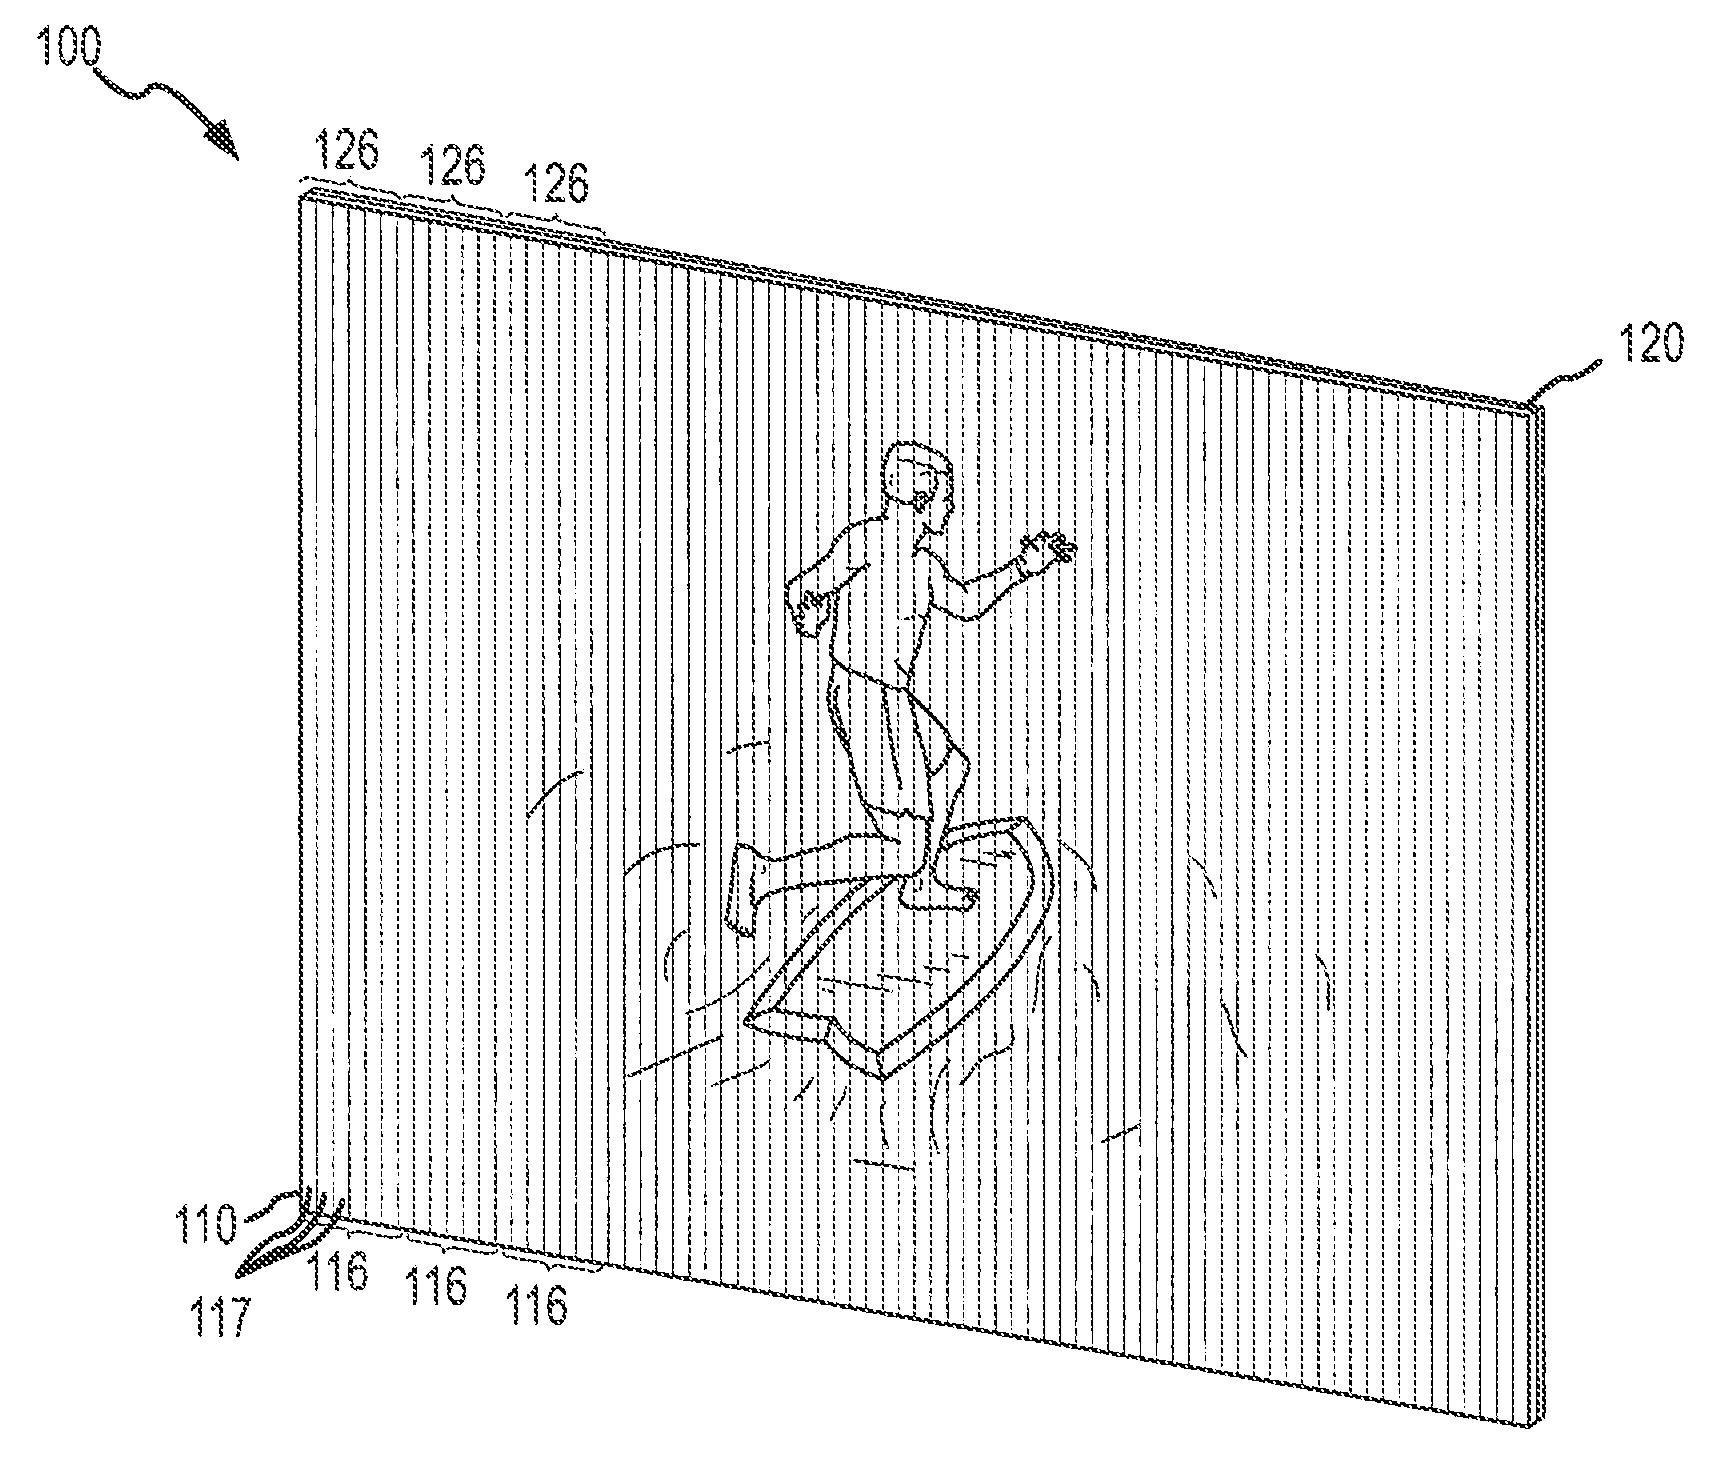 Manufacture of display devices with ultrathin lins arrays for viewing interlaced images